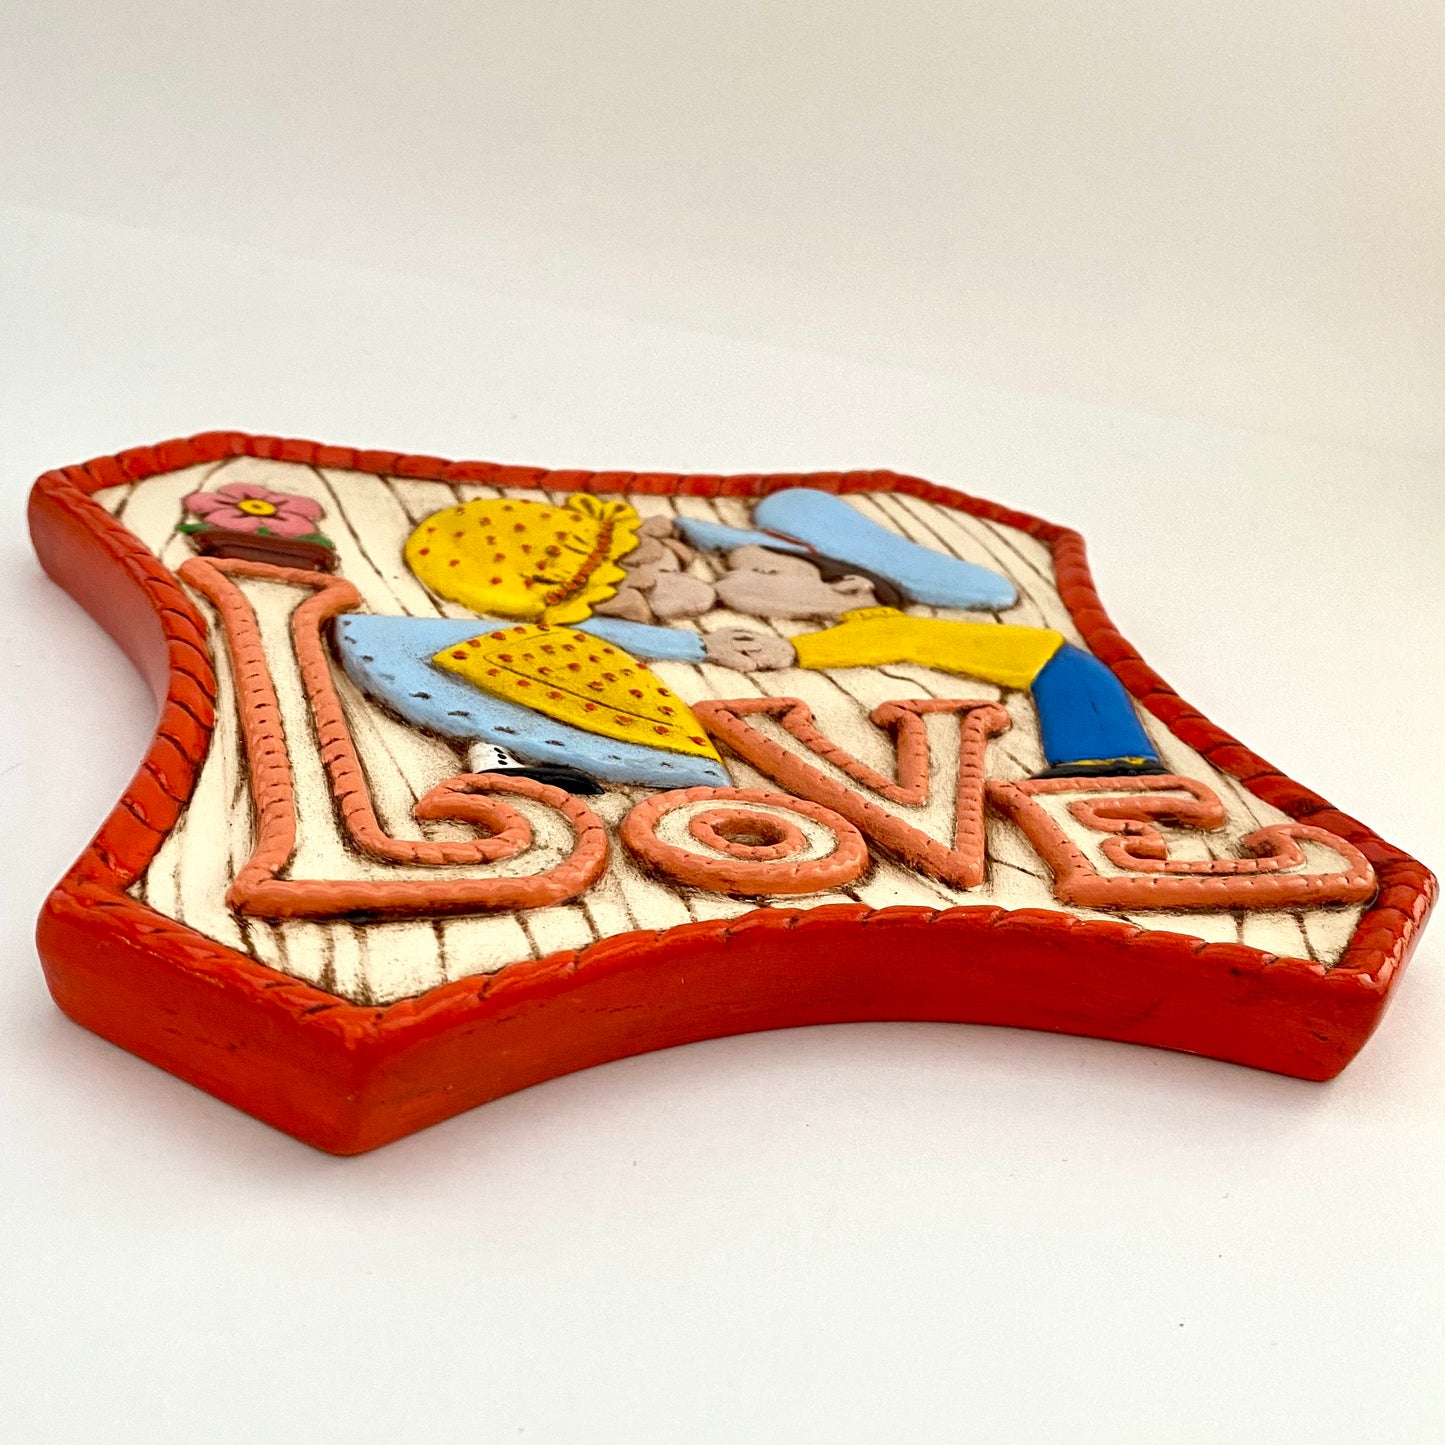 Late 70s/ Early 80s Ceramic "Love" Plaque